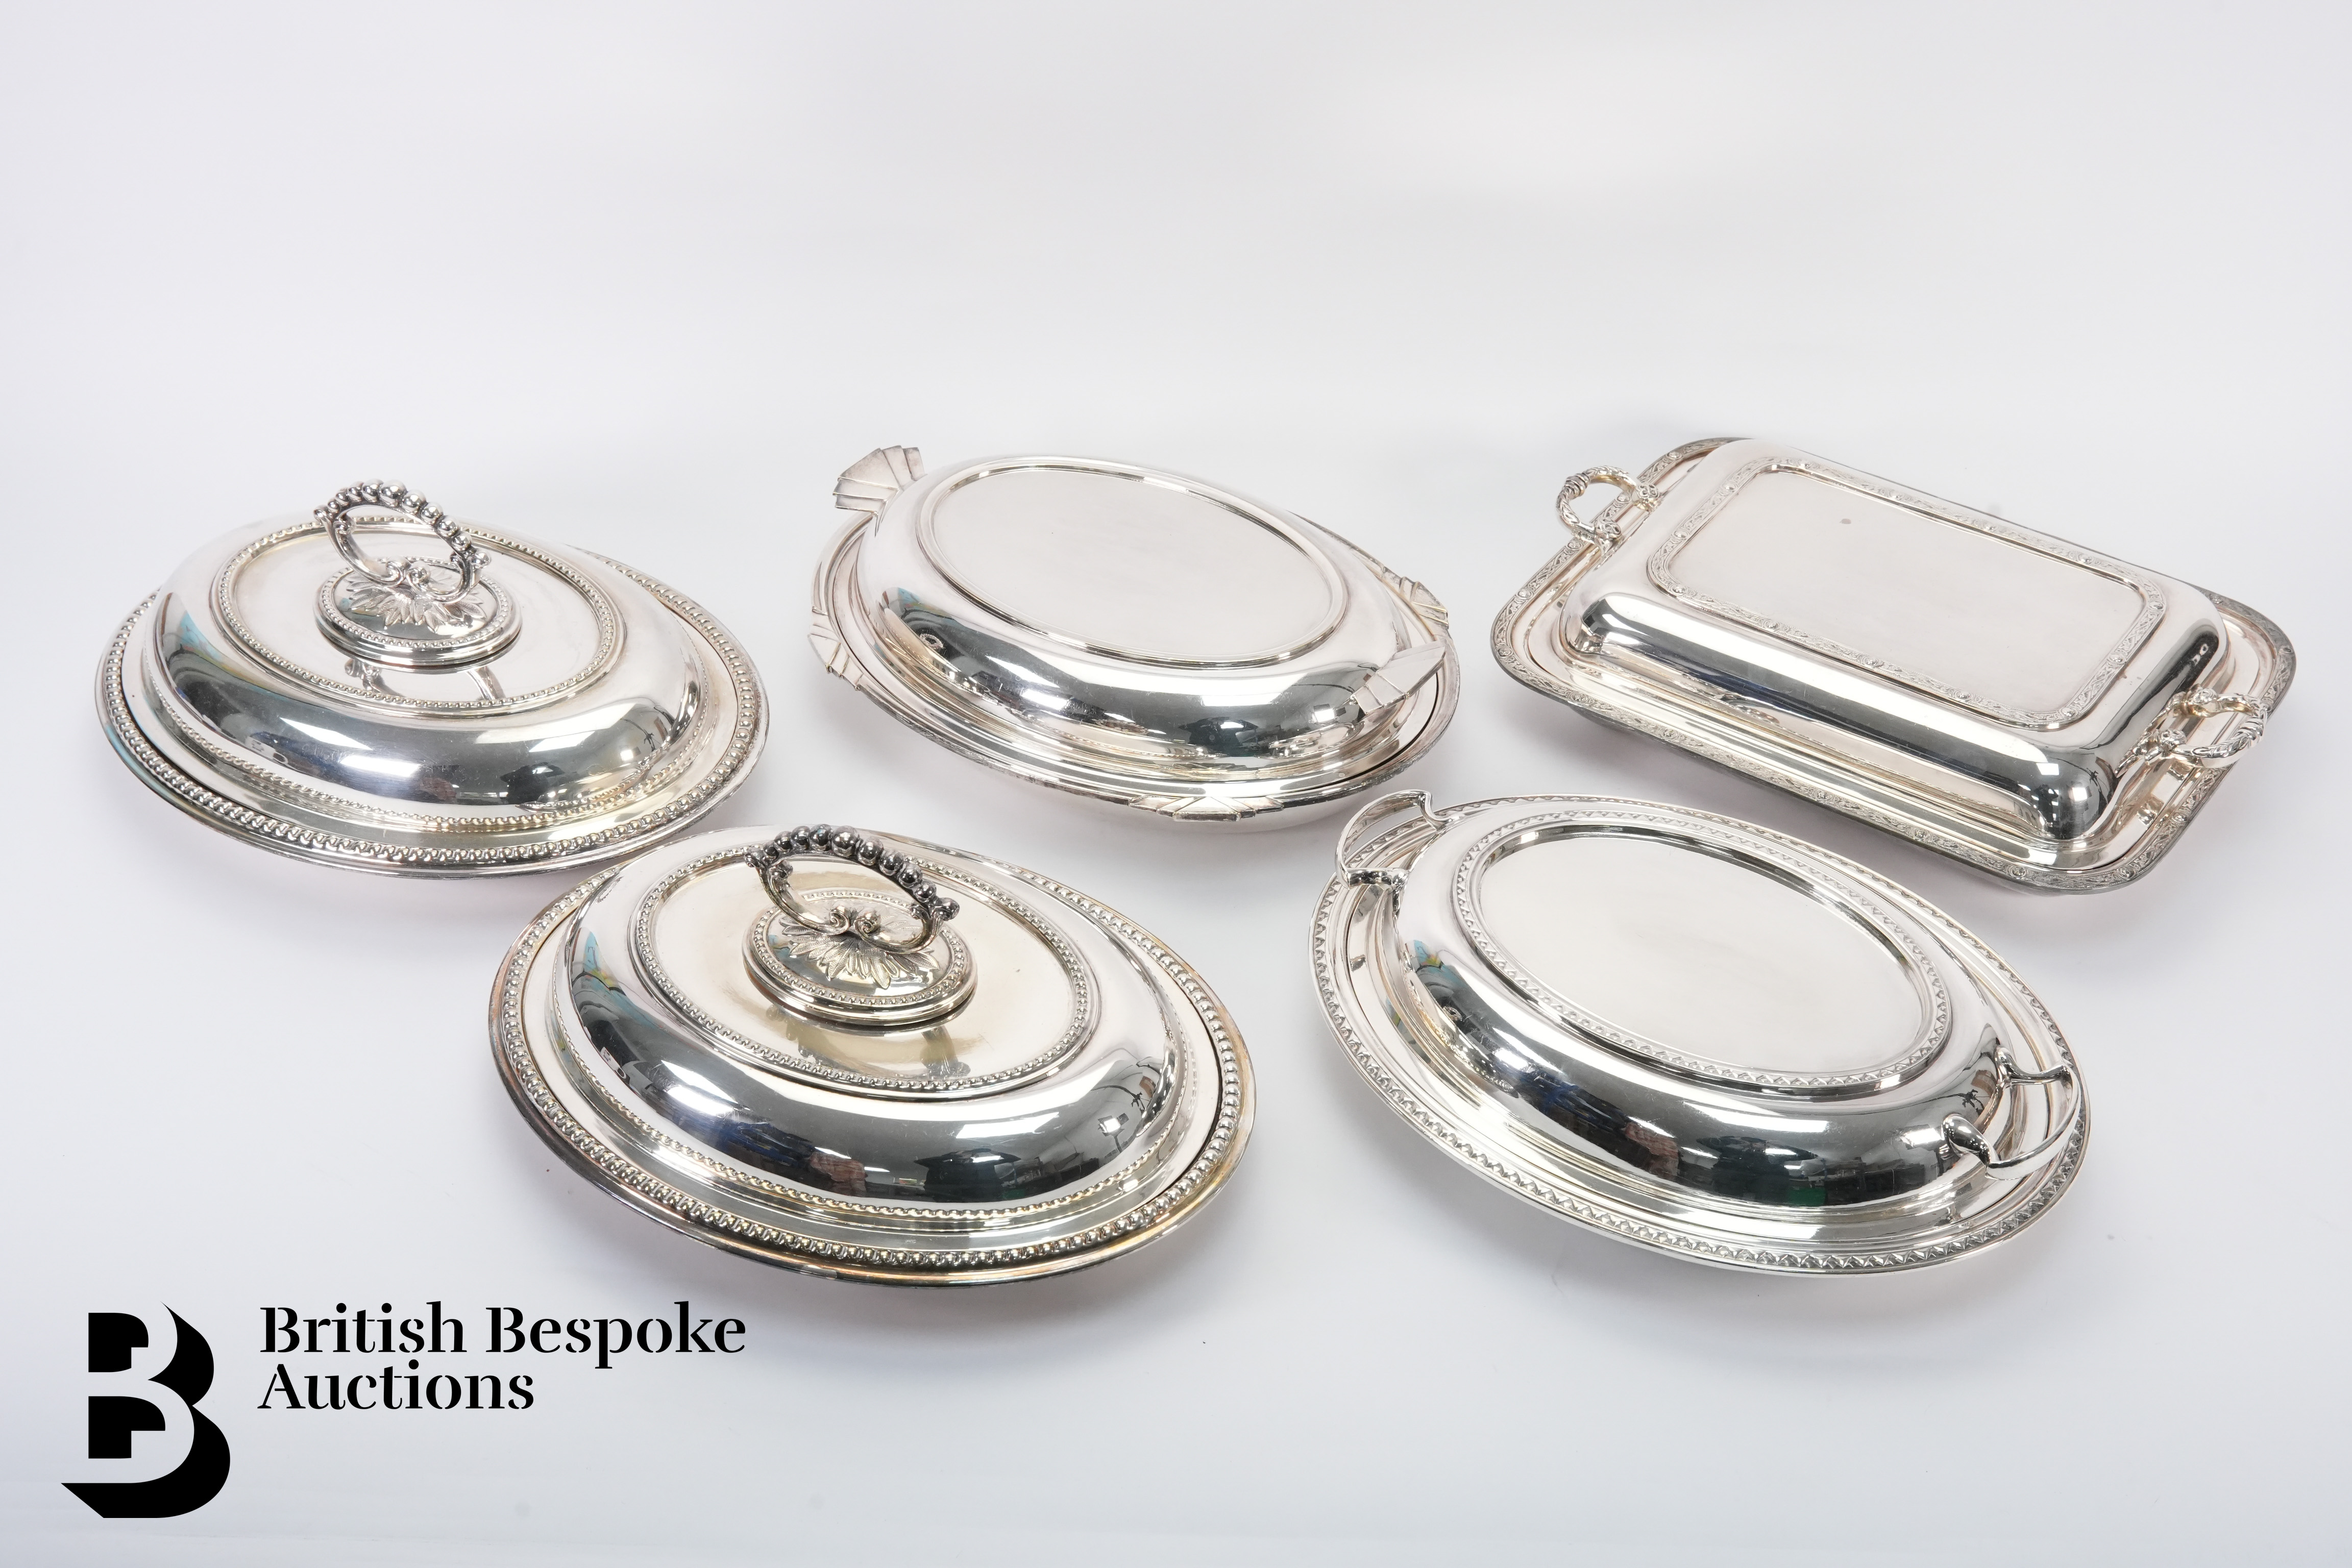 Silver Plated Entree Dishes and Covers